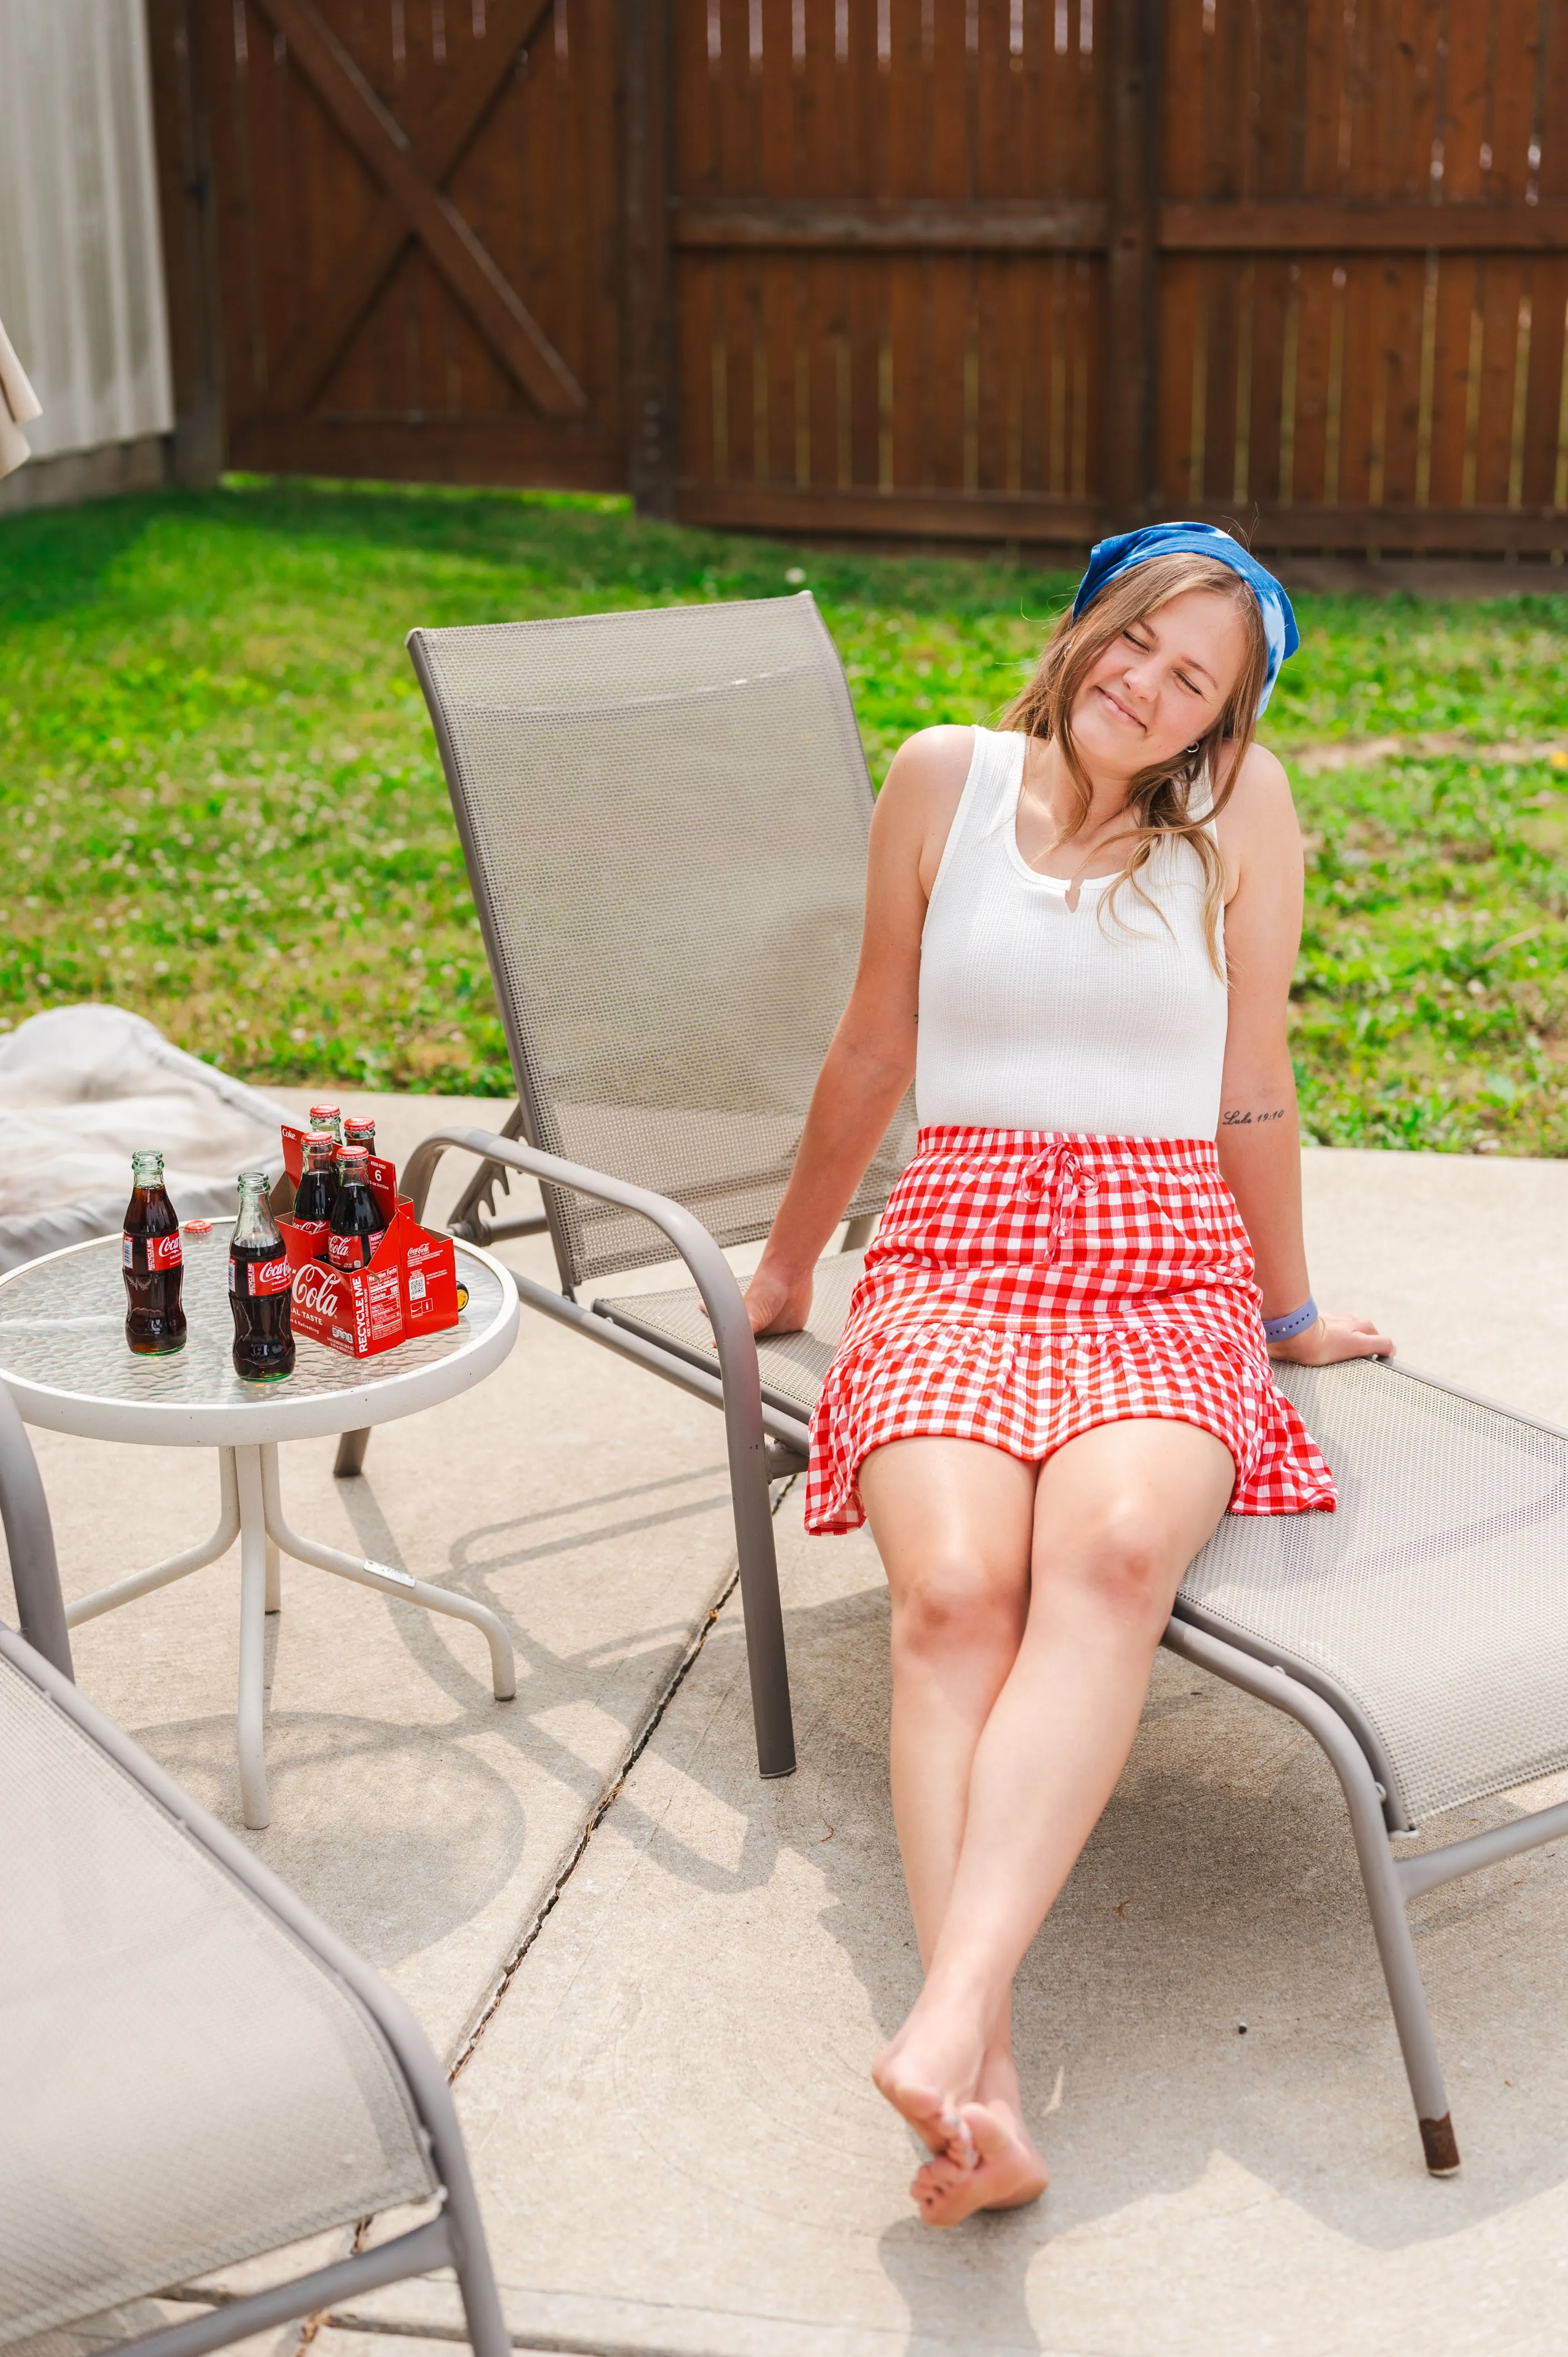 Woman smiling and relaxing on a patio chair with closed eyes, wearing a white tank top and red gingham skirt, with a table holding bottles of Coca-Cola nearby.